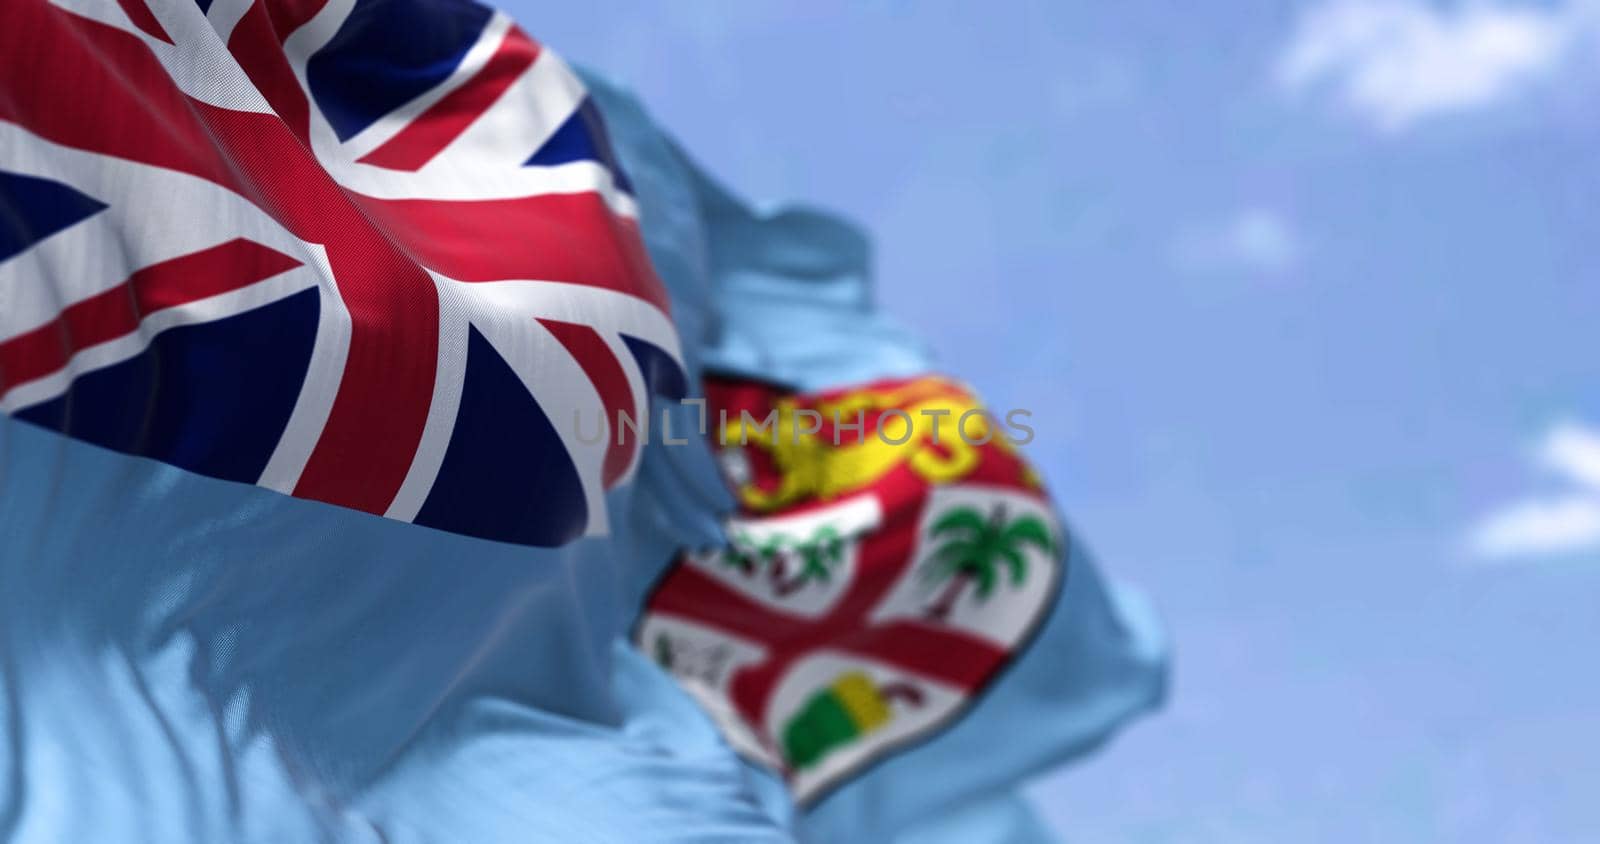 Detail of the national flag of FIji waving in the wind on a clear day. Fiji is an island country in Melanesia, part of Oceania in the South Pacific Ocean. Selective focus. Seamless slow motion